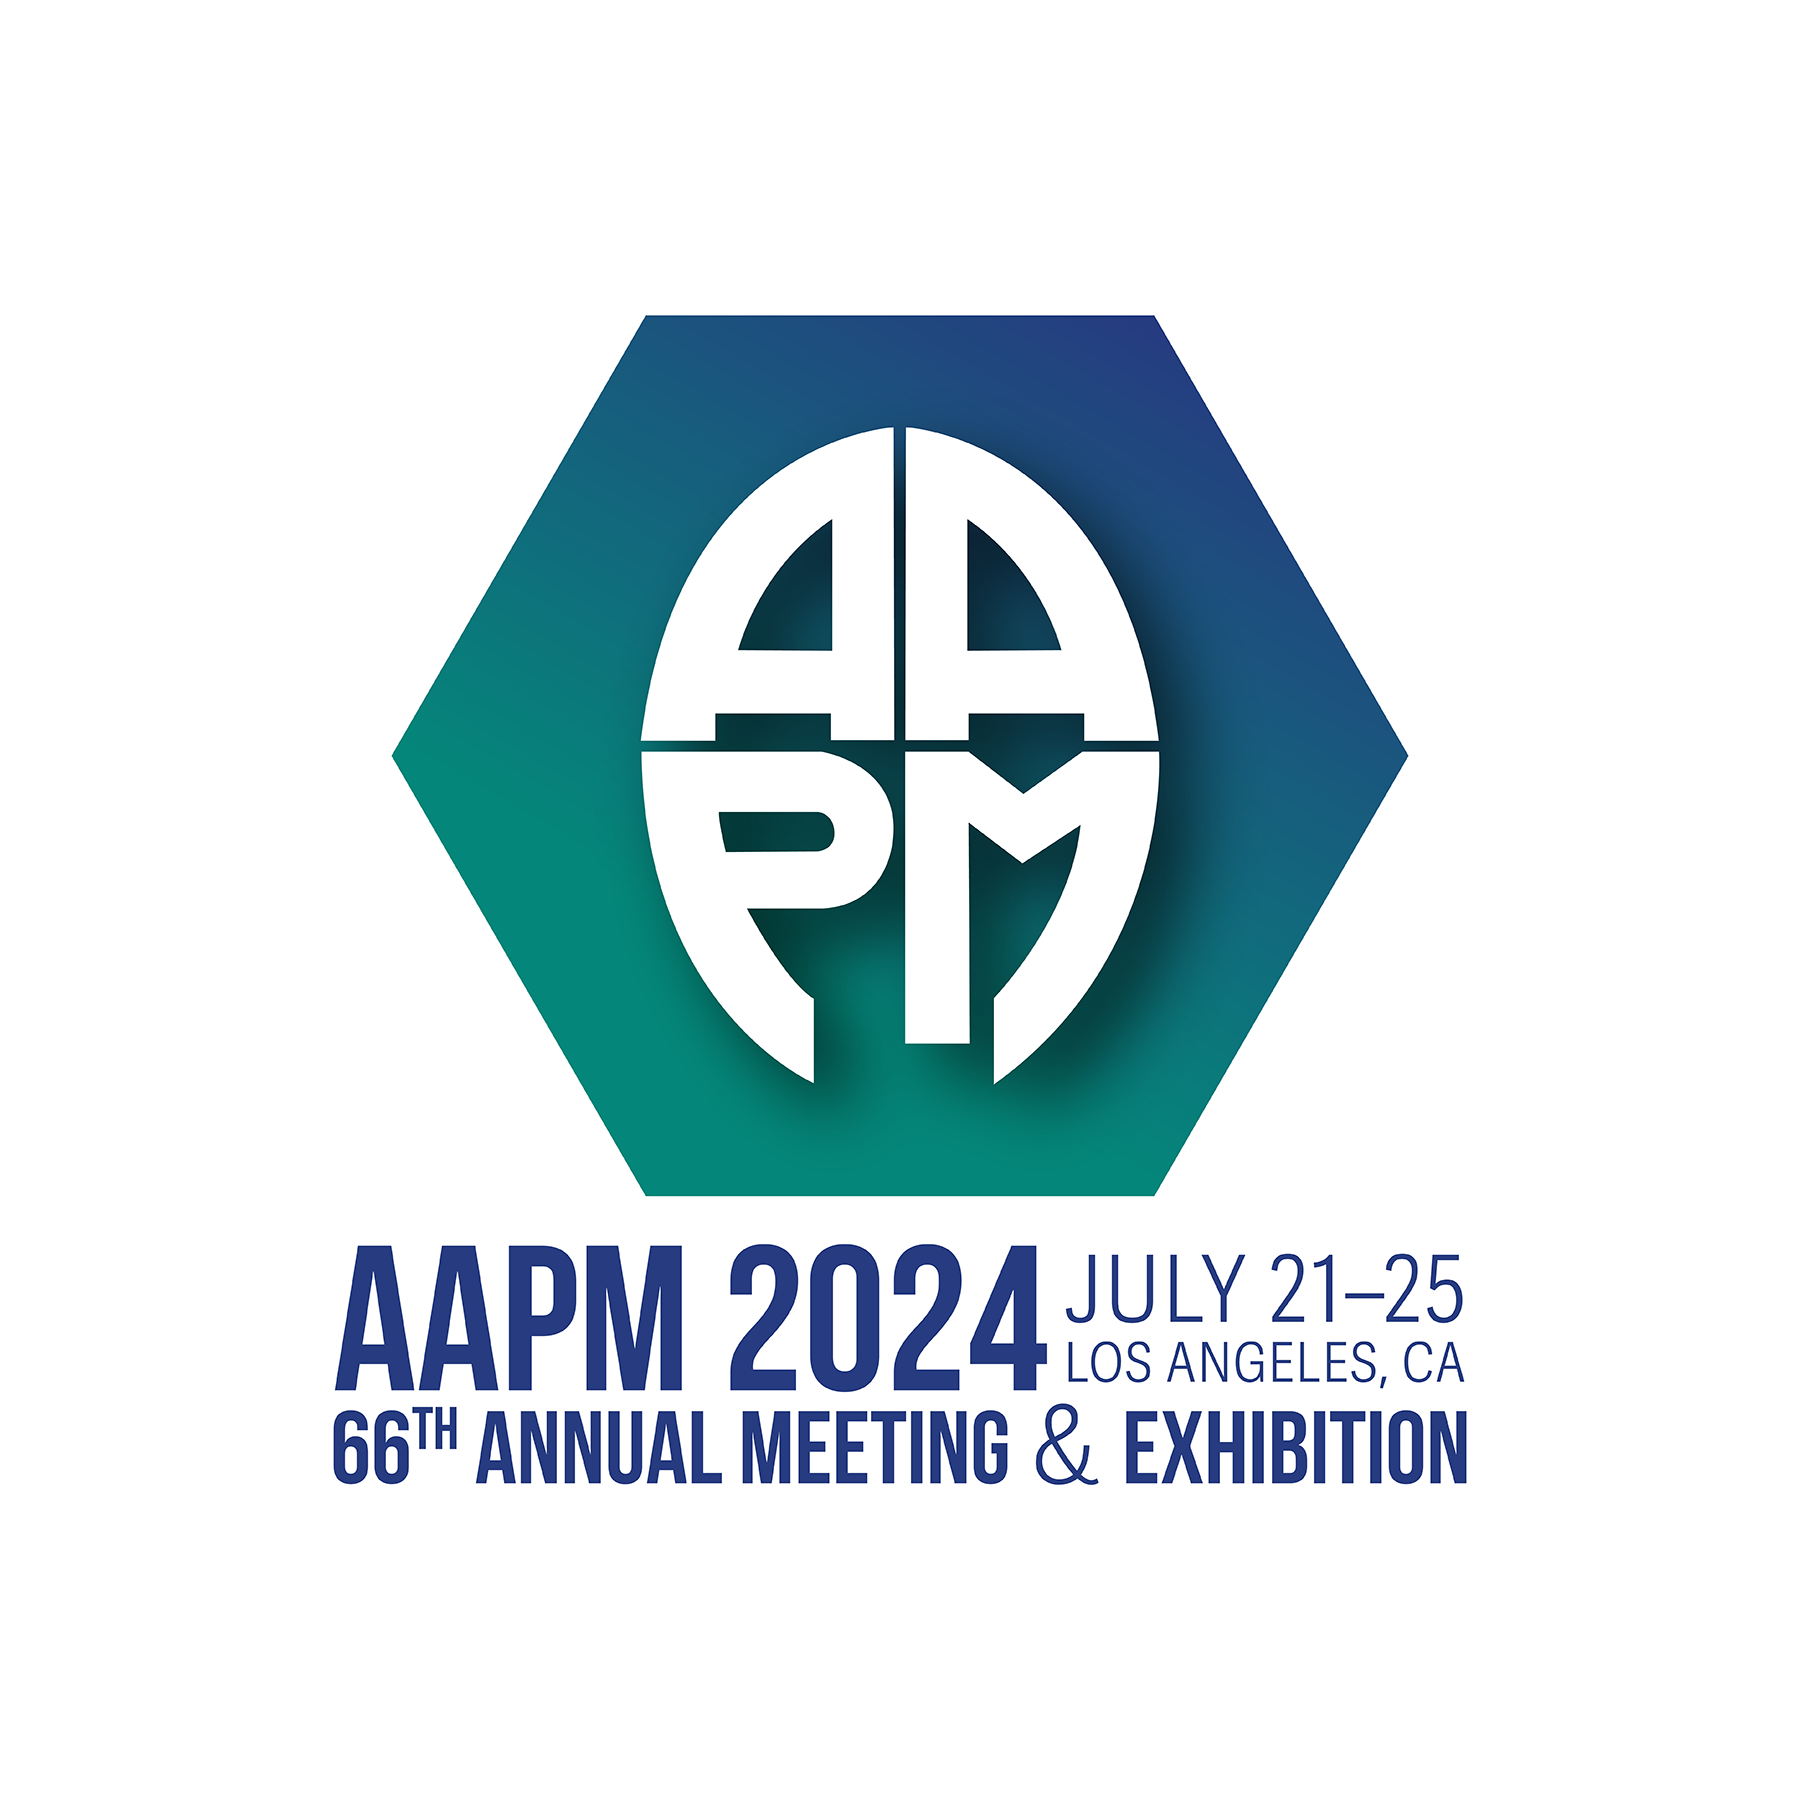 AAPM 66th Annual Meeting & Exhibition